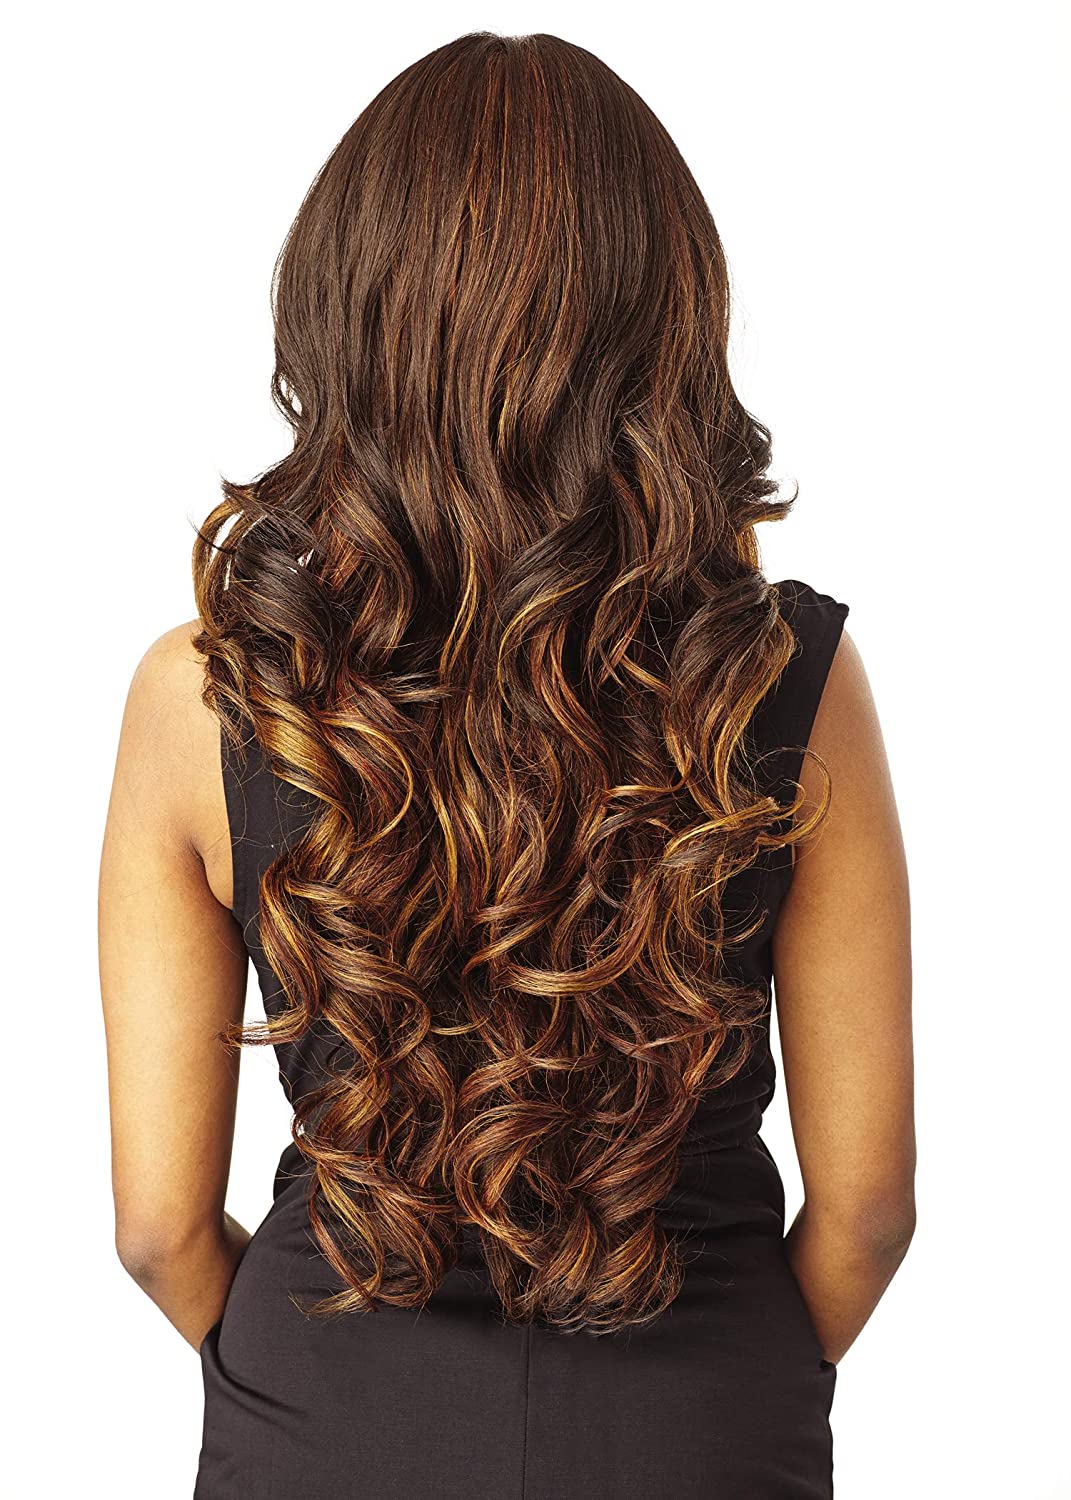 Lush Locks  Highlighted Long Curly Black Blonde Natural Looking Wig